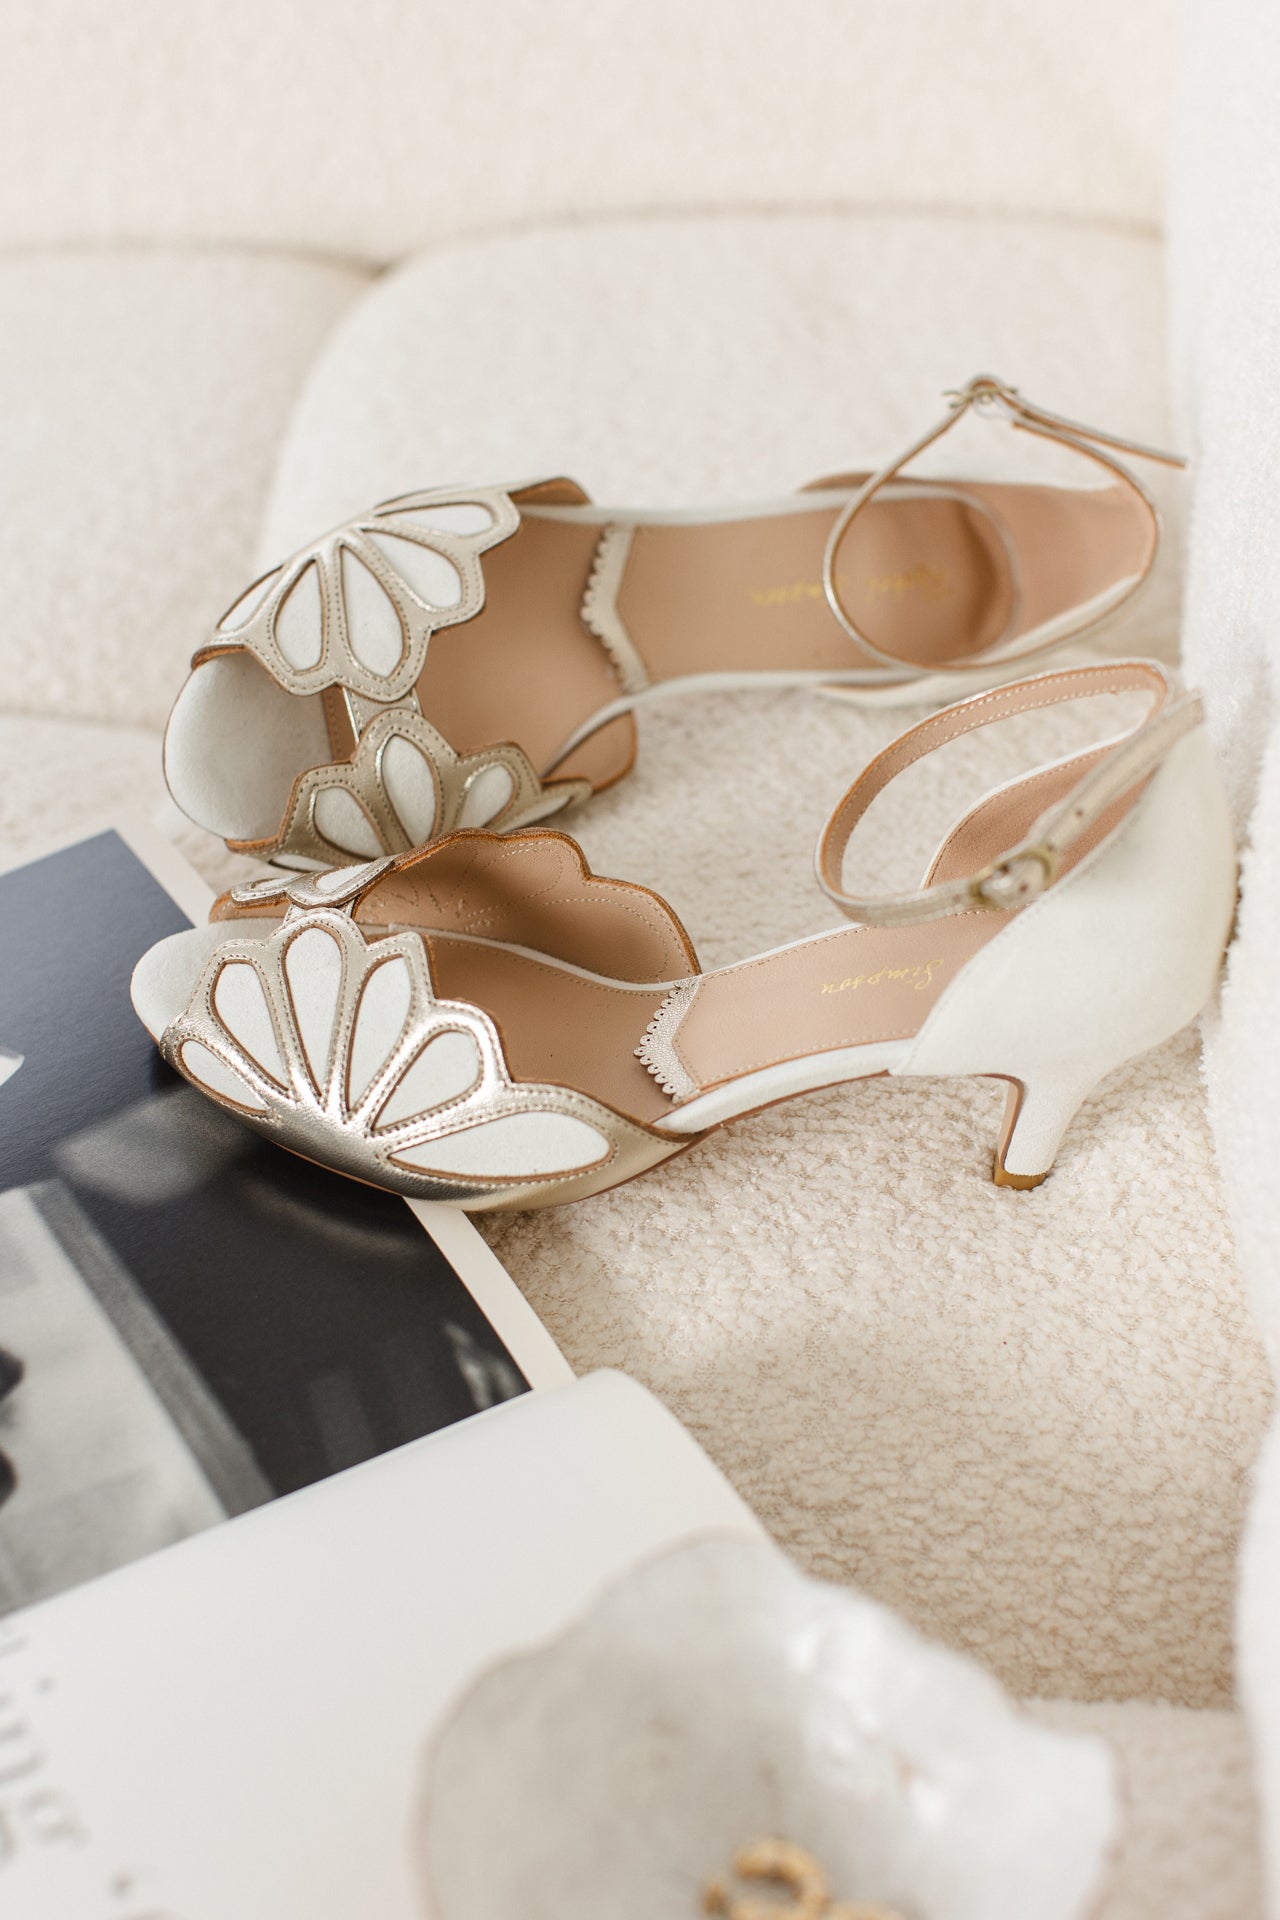 Ivory and gold art deco style wedding shoes- Isadora by Rachel Simpson